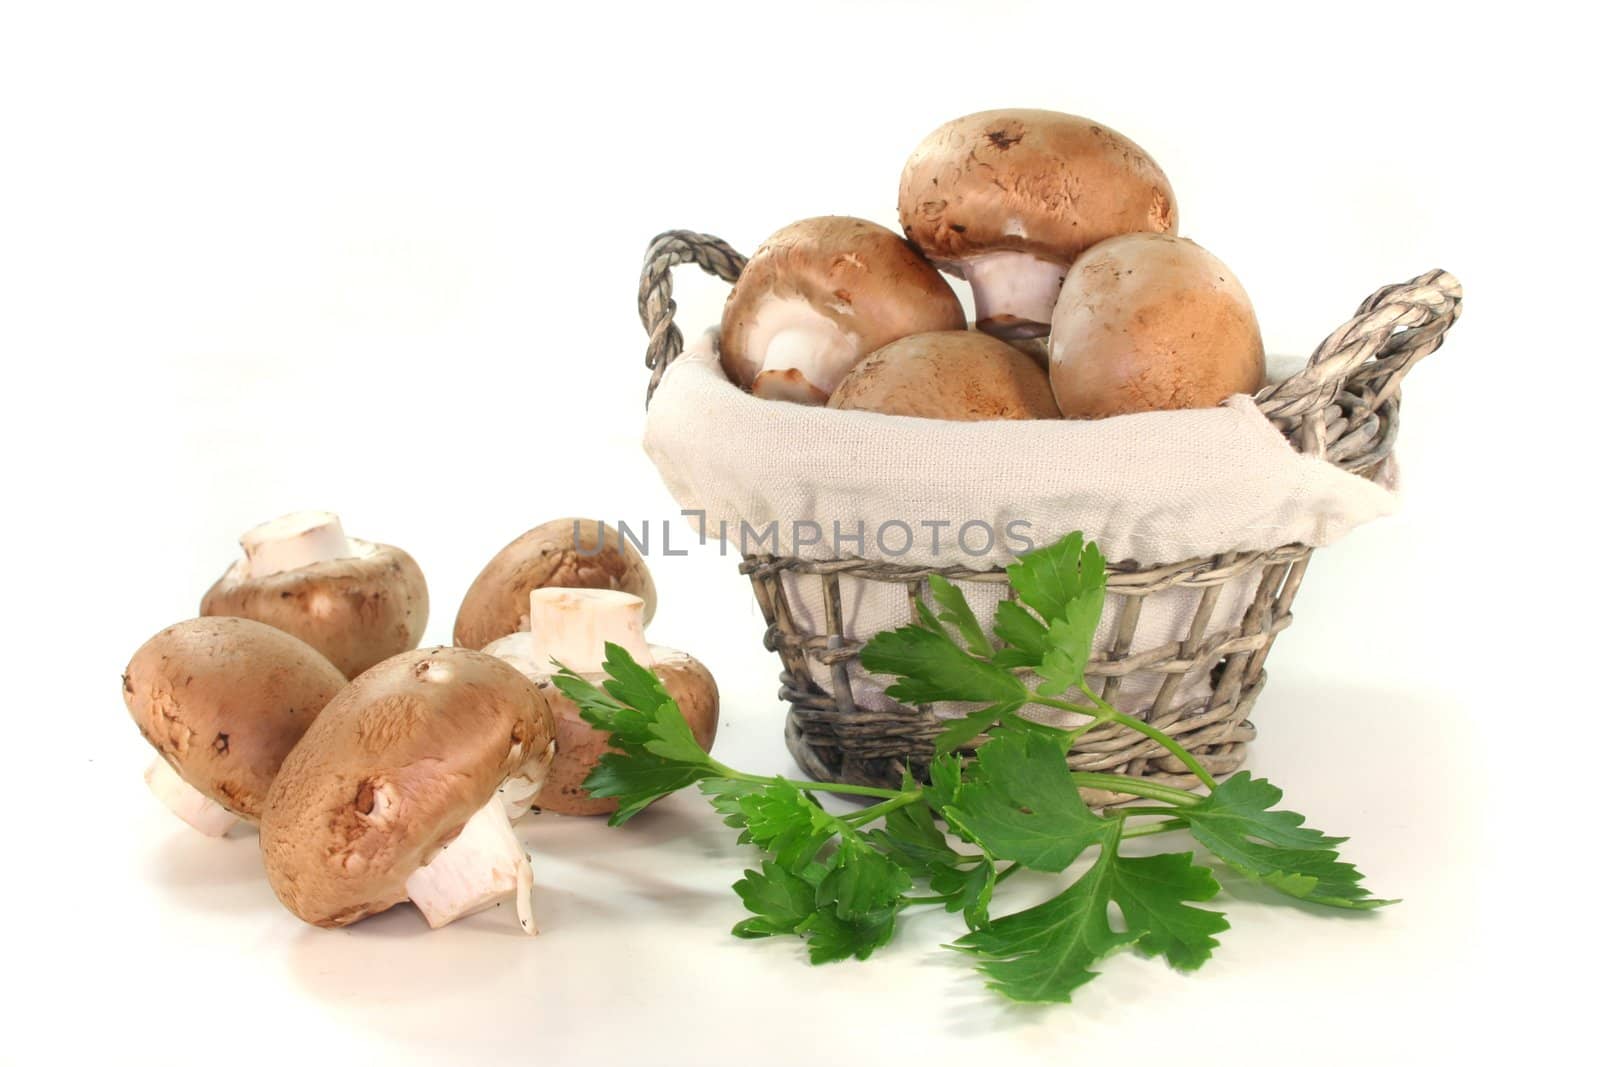 Mushrooms in a basket with parsley on a white background